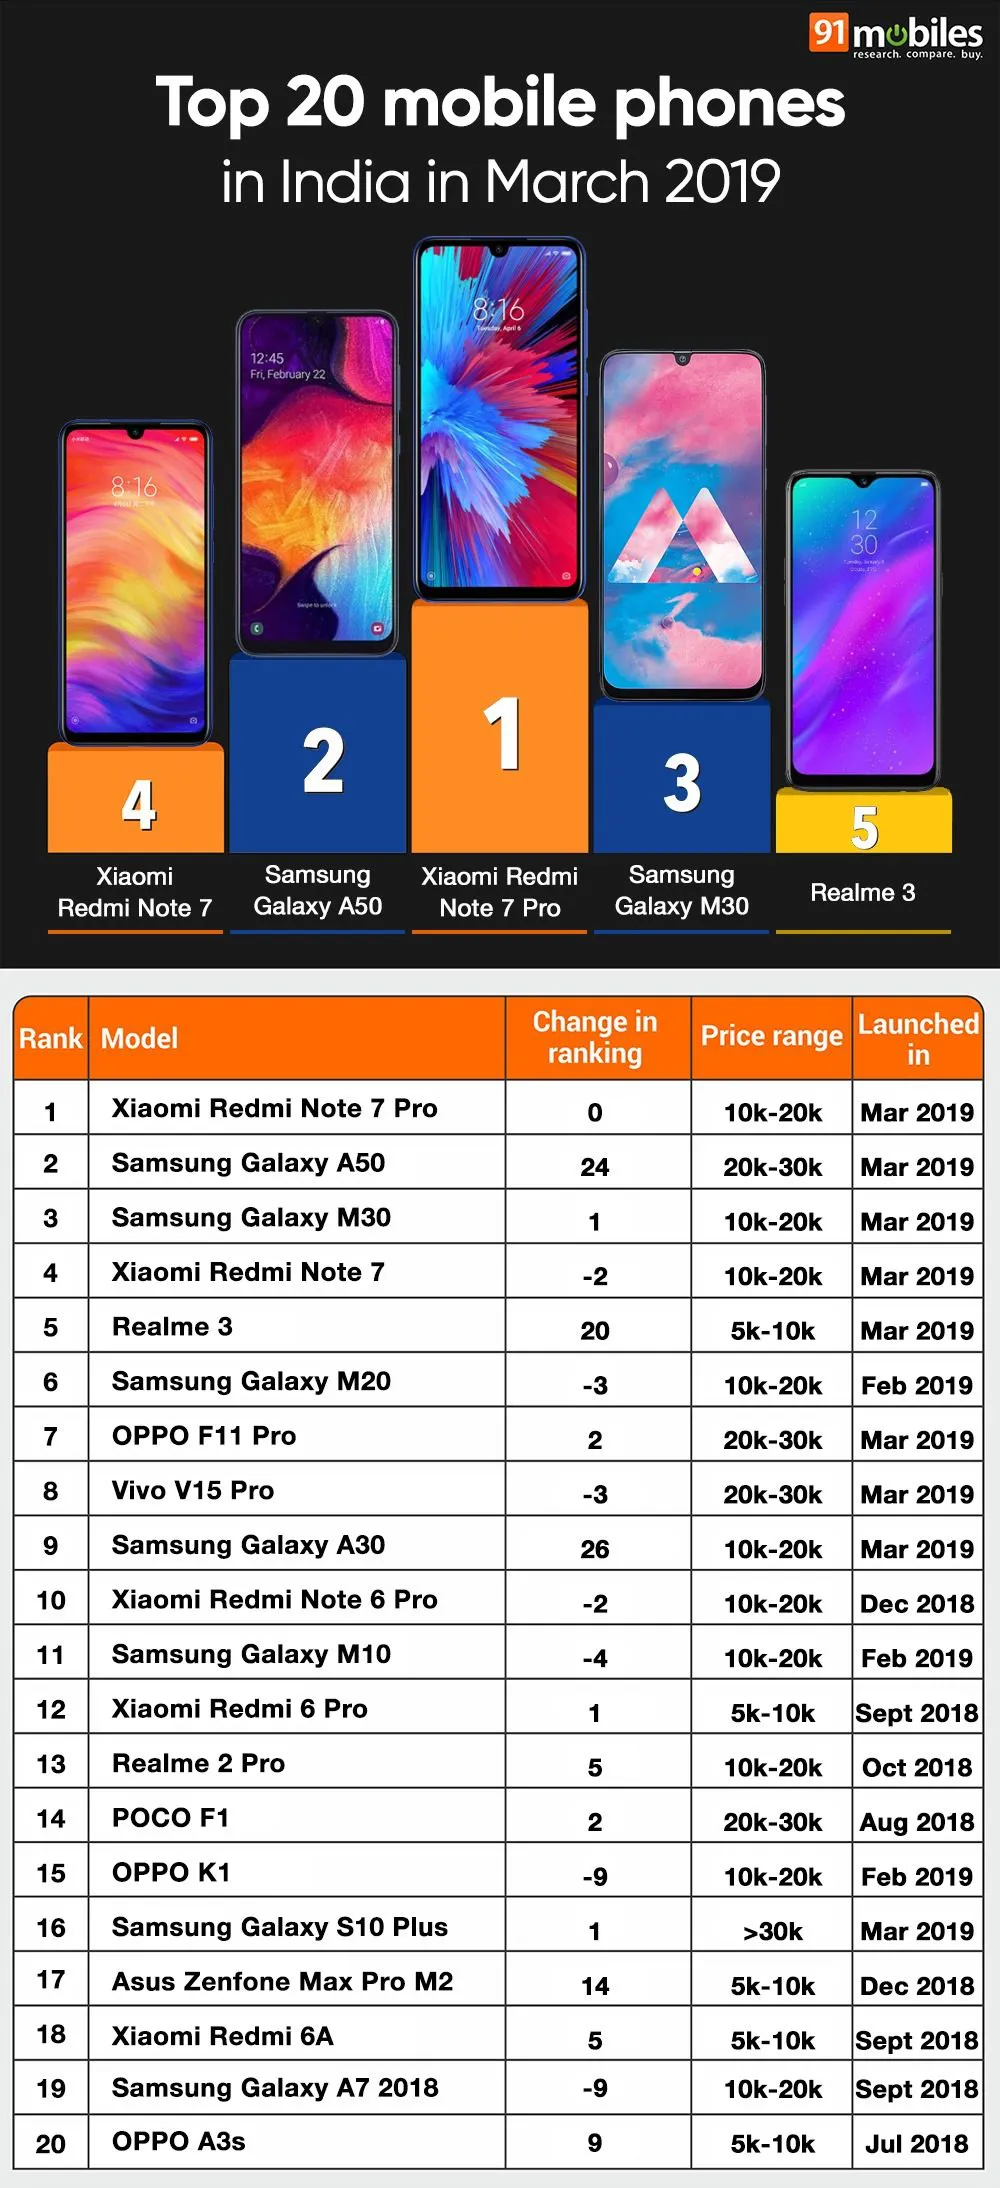 Top-20-mobile-phones-in-India-in-March-2019_thumb-e1554544512940.jpg